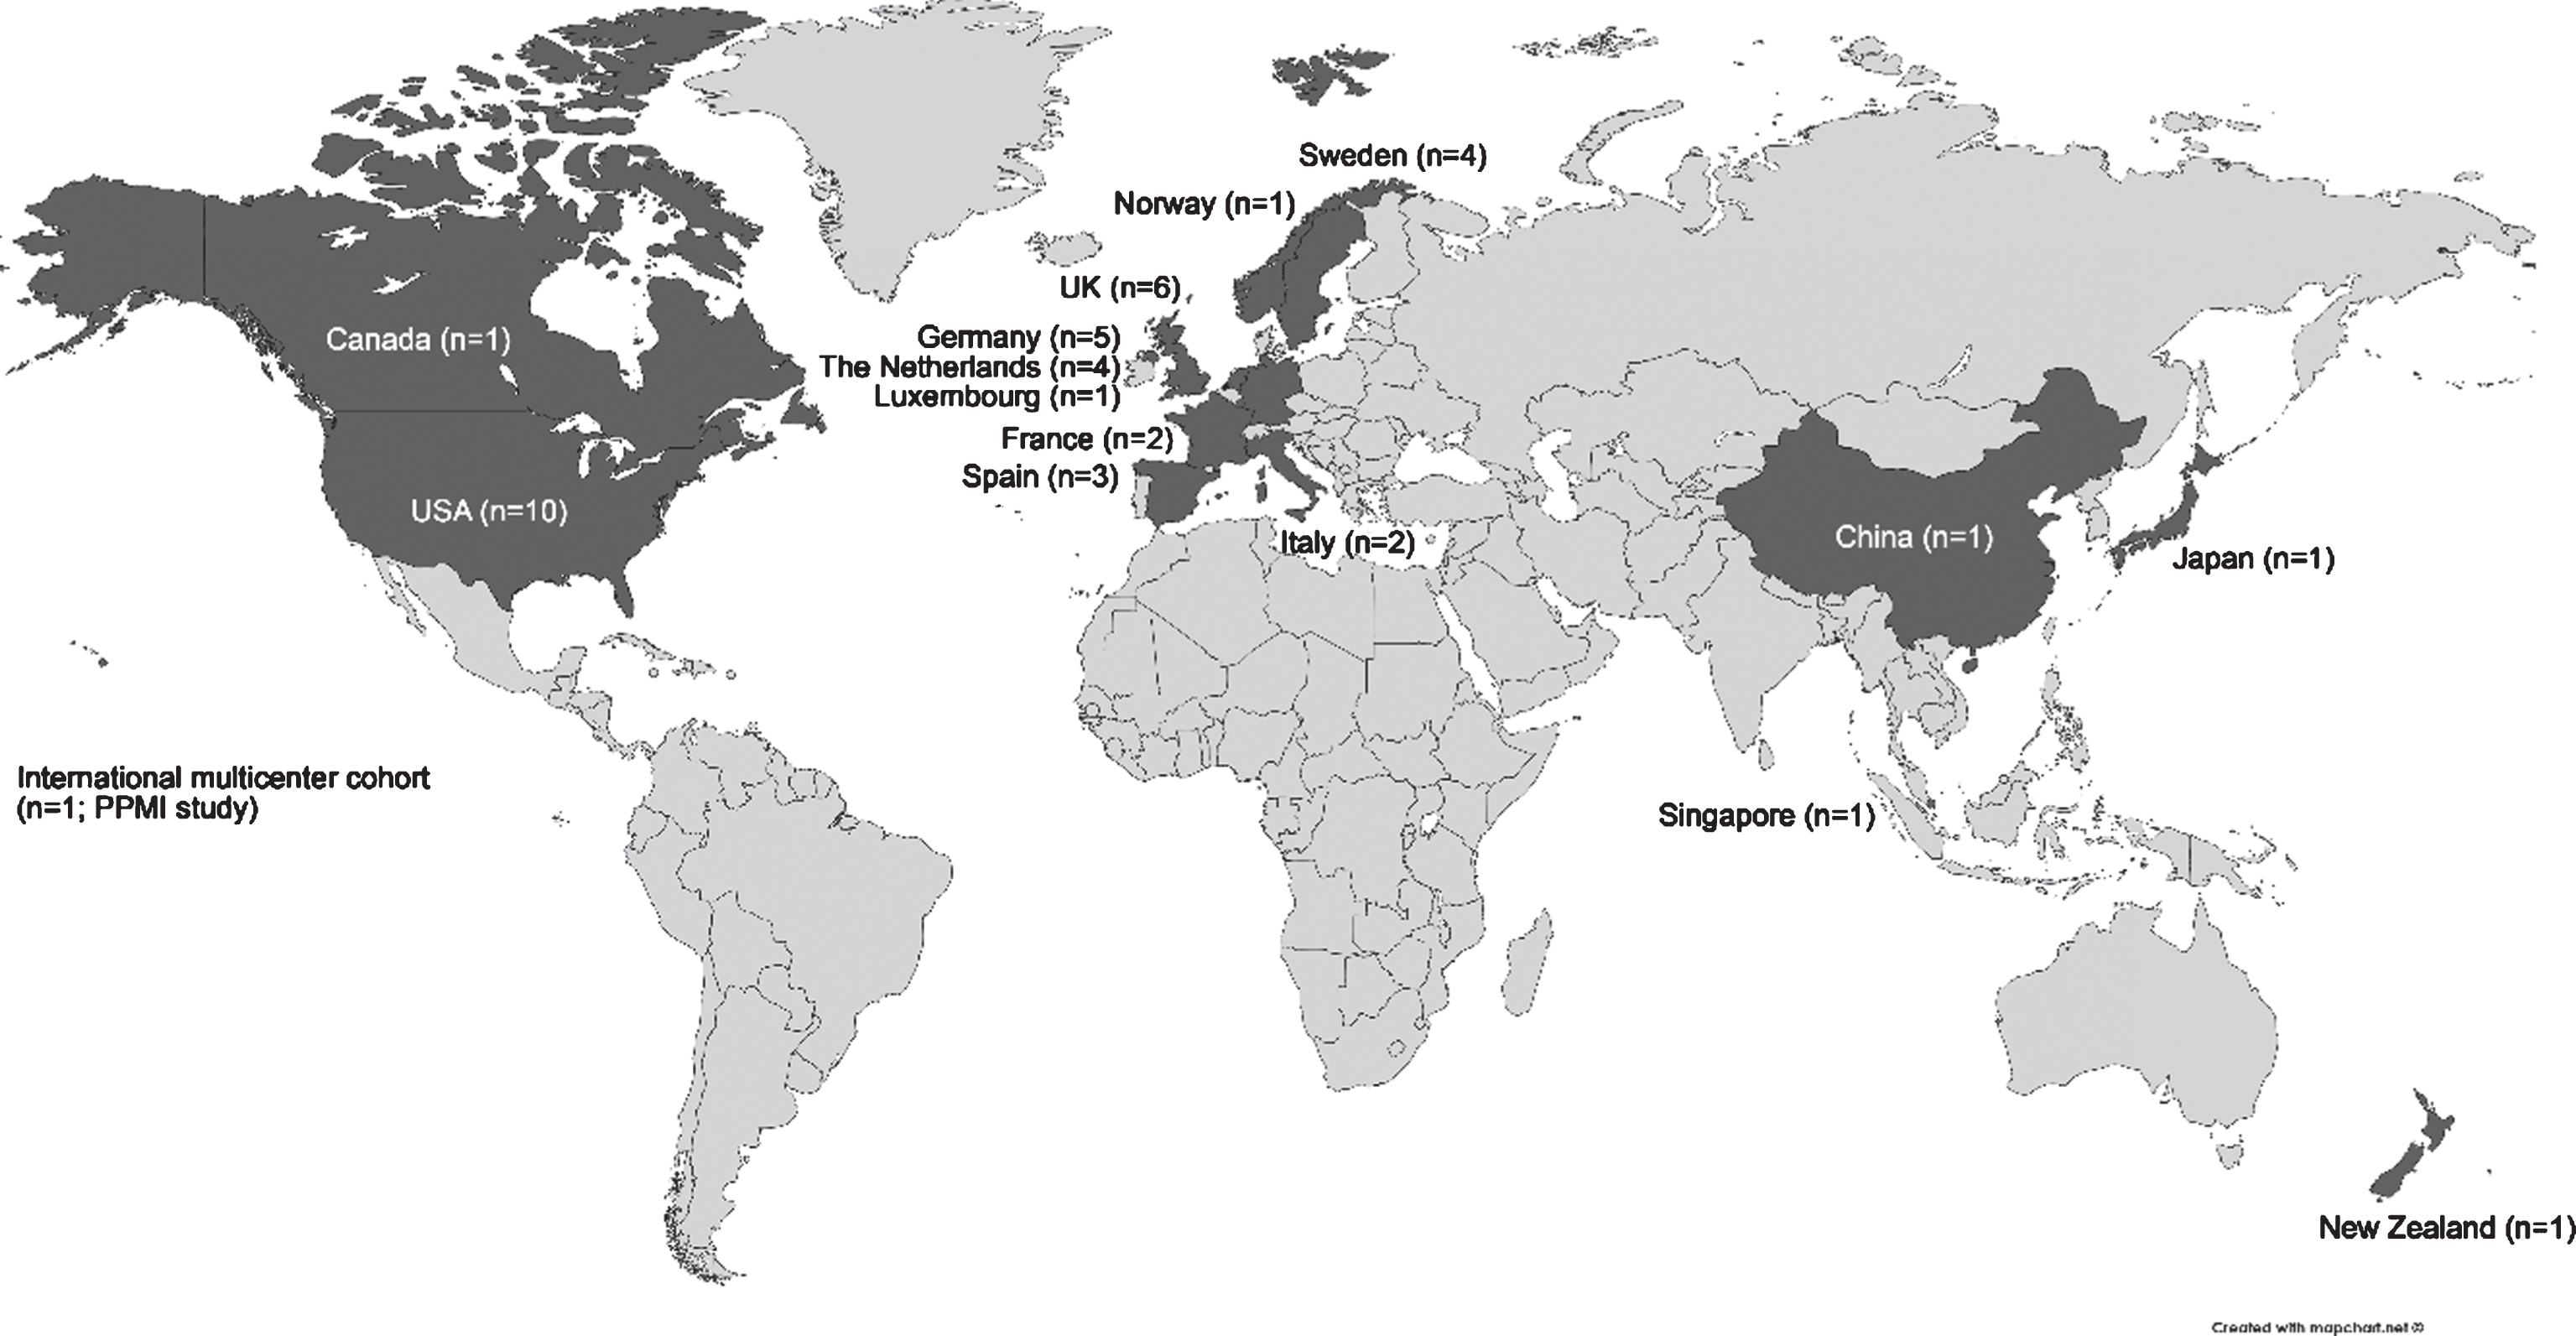 Global overview of cohort studies in clinical Parkinson’s disease. Adapted from map created on www.mapchart.net©.